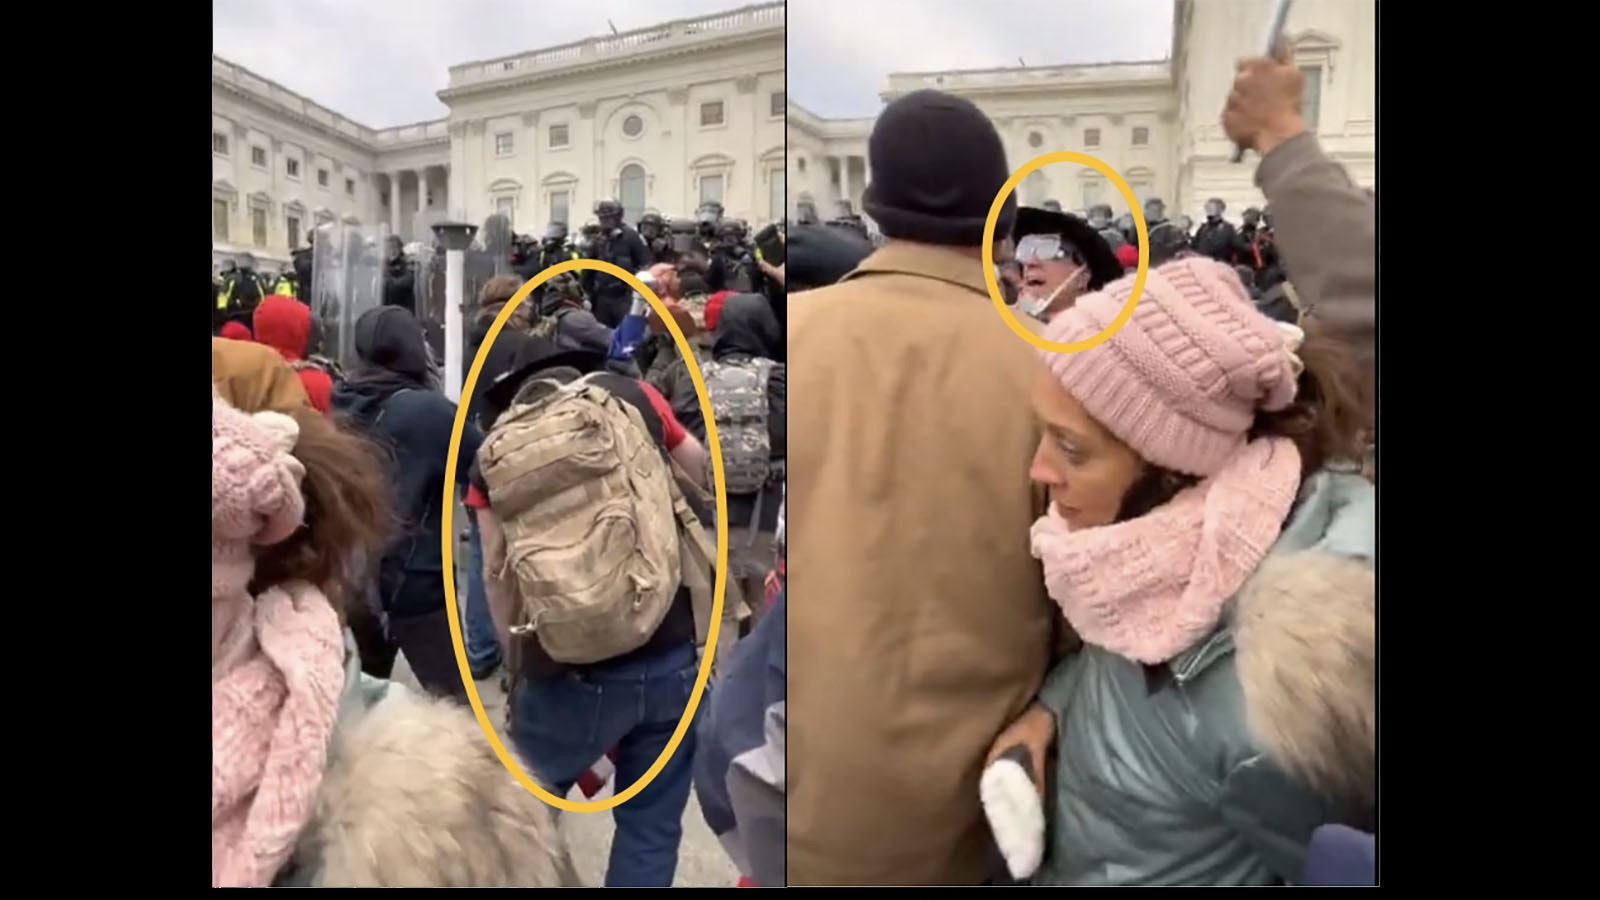 Images from the Jan. 6, 2021, Capitol riot the FBI says show Wyoming resident Douglas Harrington there.